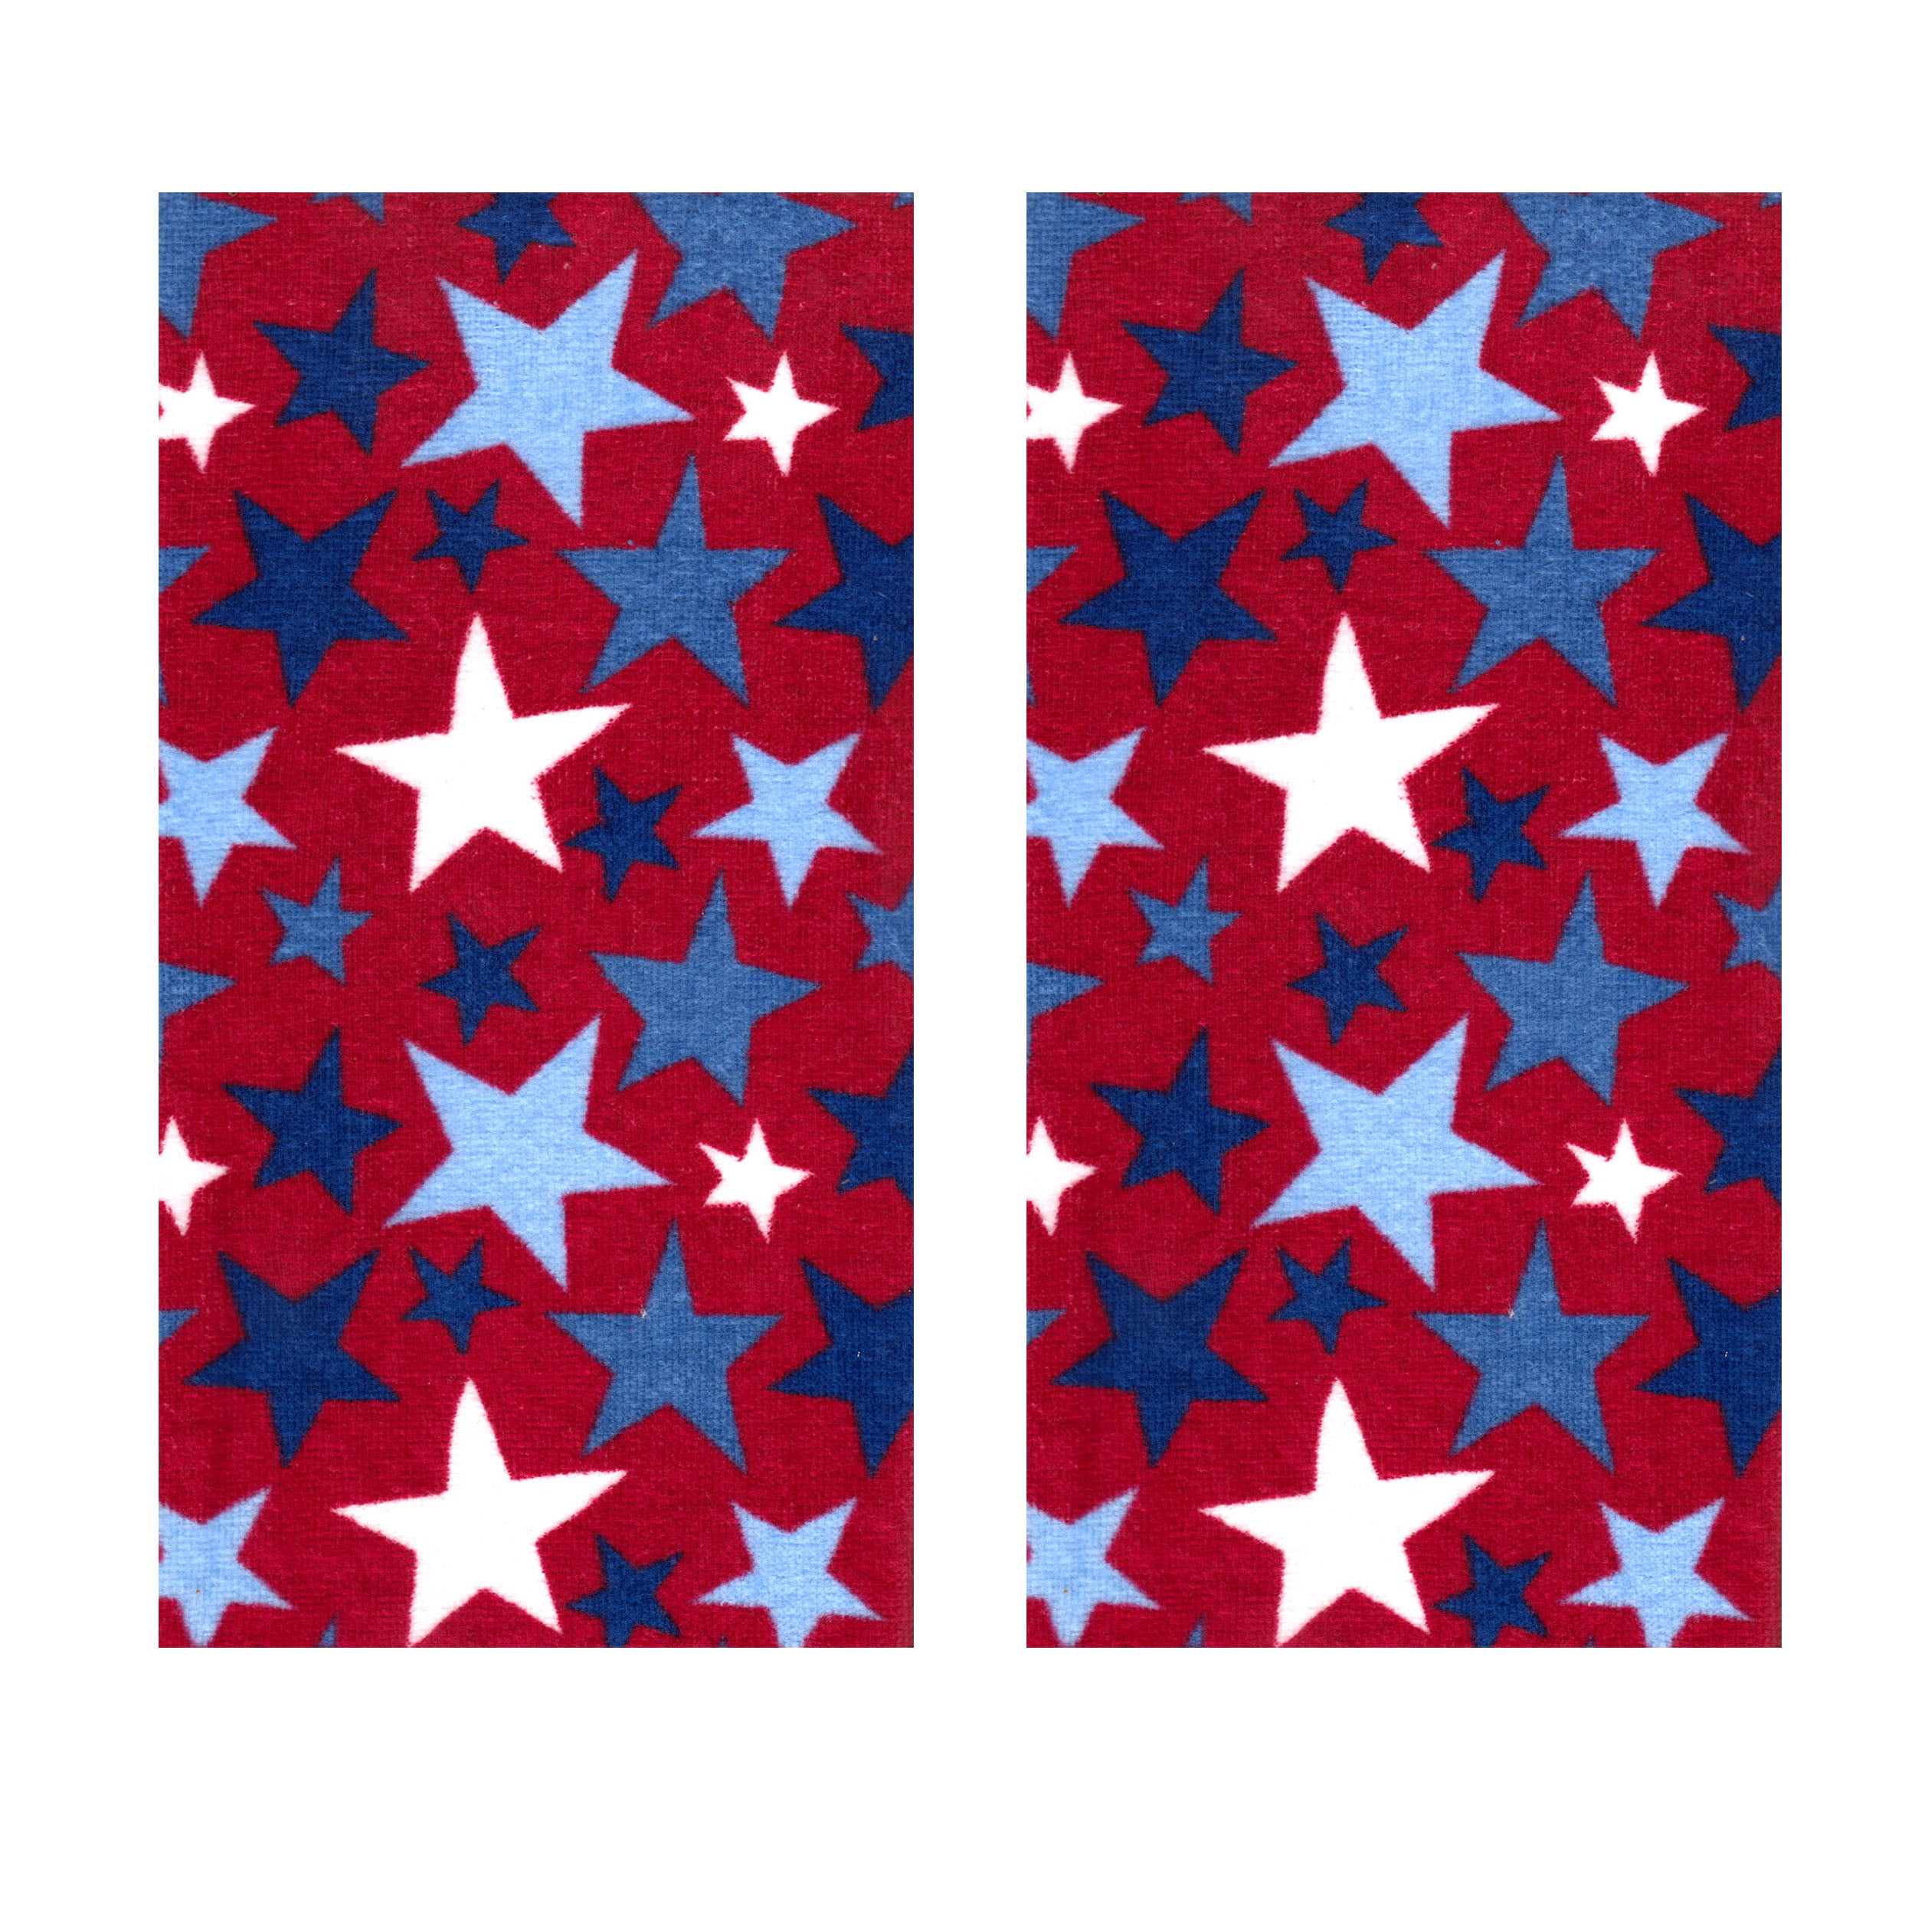 TRULY LOU KITCHEN TOWELS (2) CATS PATRIOTIC RED BLUE BLACK TAN